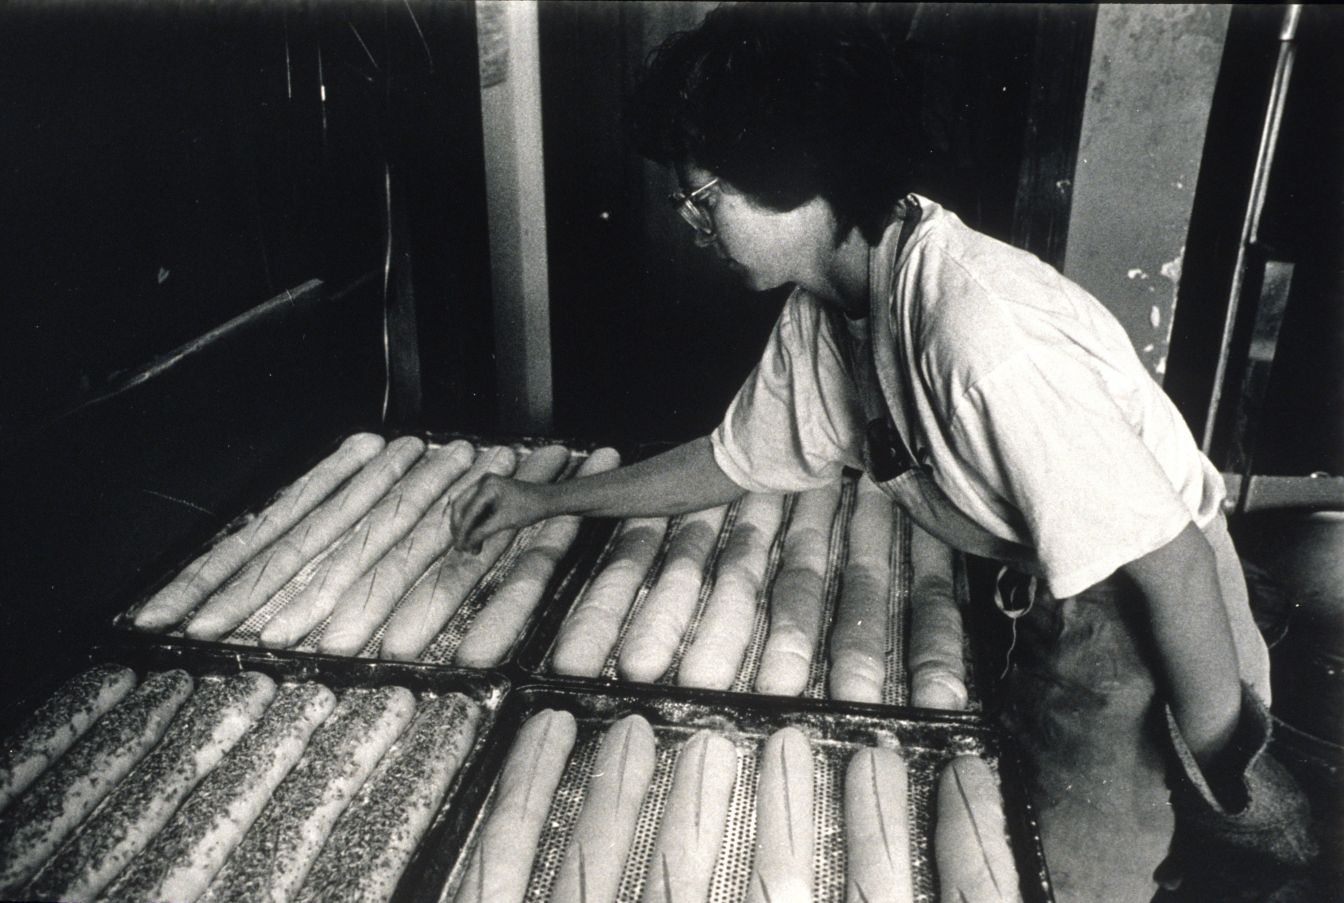 Black and white photo of woman making bread